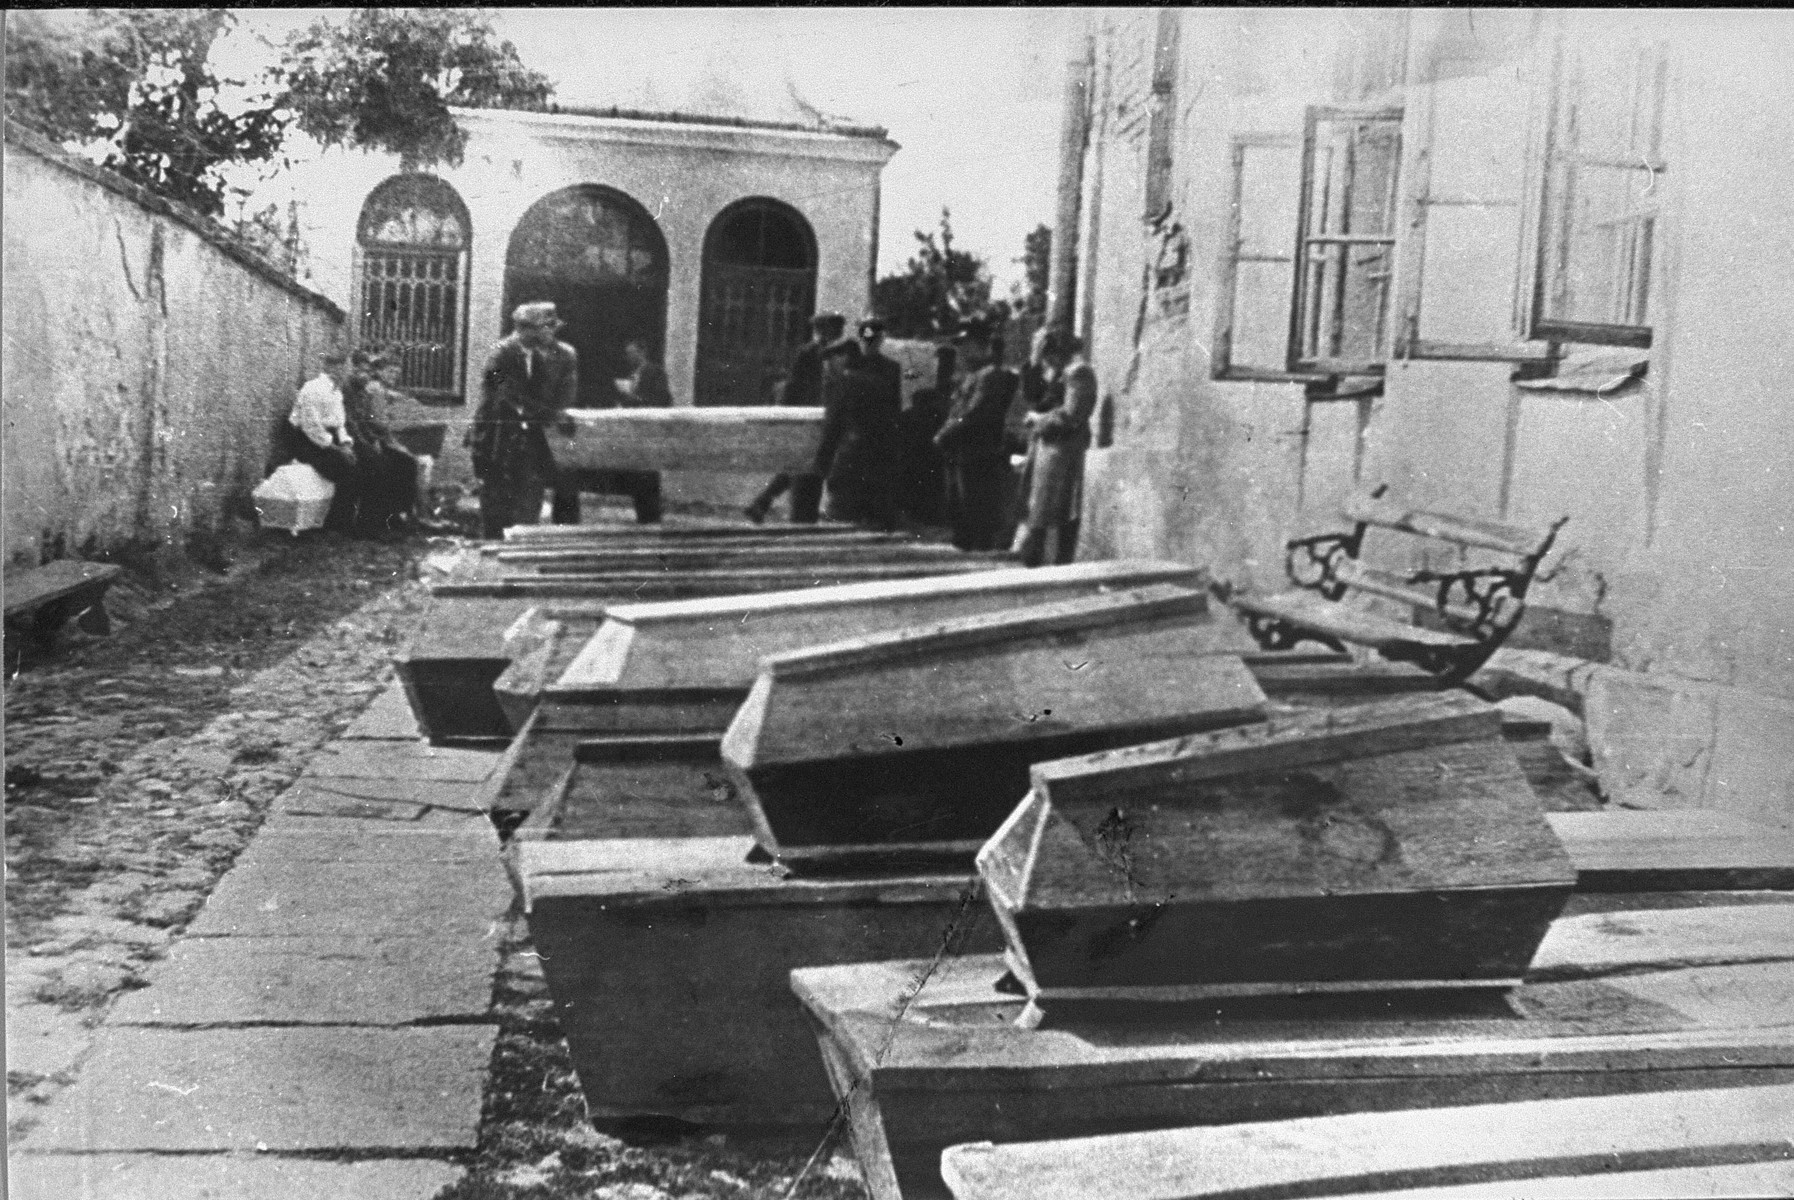 Coffins for the victims of the Kielce pogrom are laid out in a courtyard.  In the background a group of men remove one of the coffins while a young woman holds her head in despair.